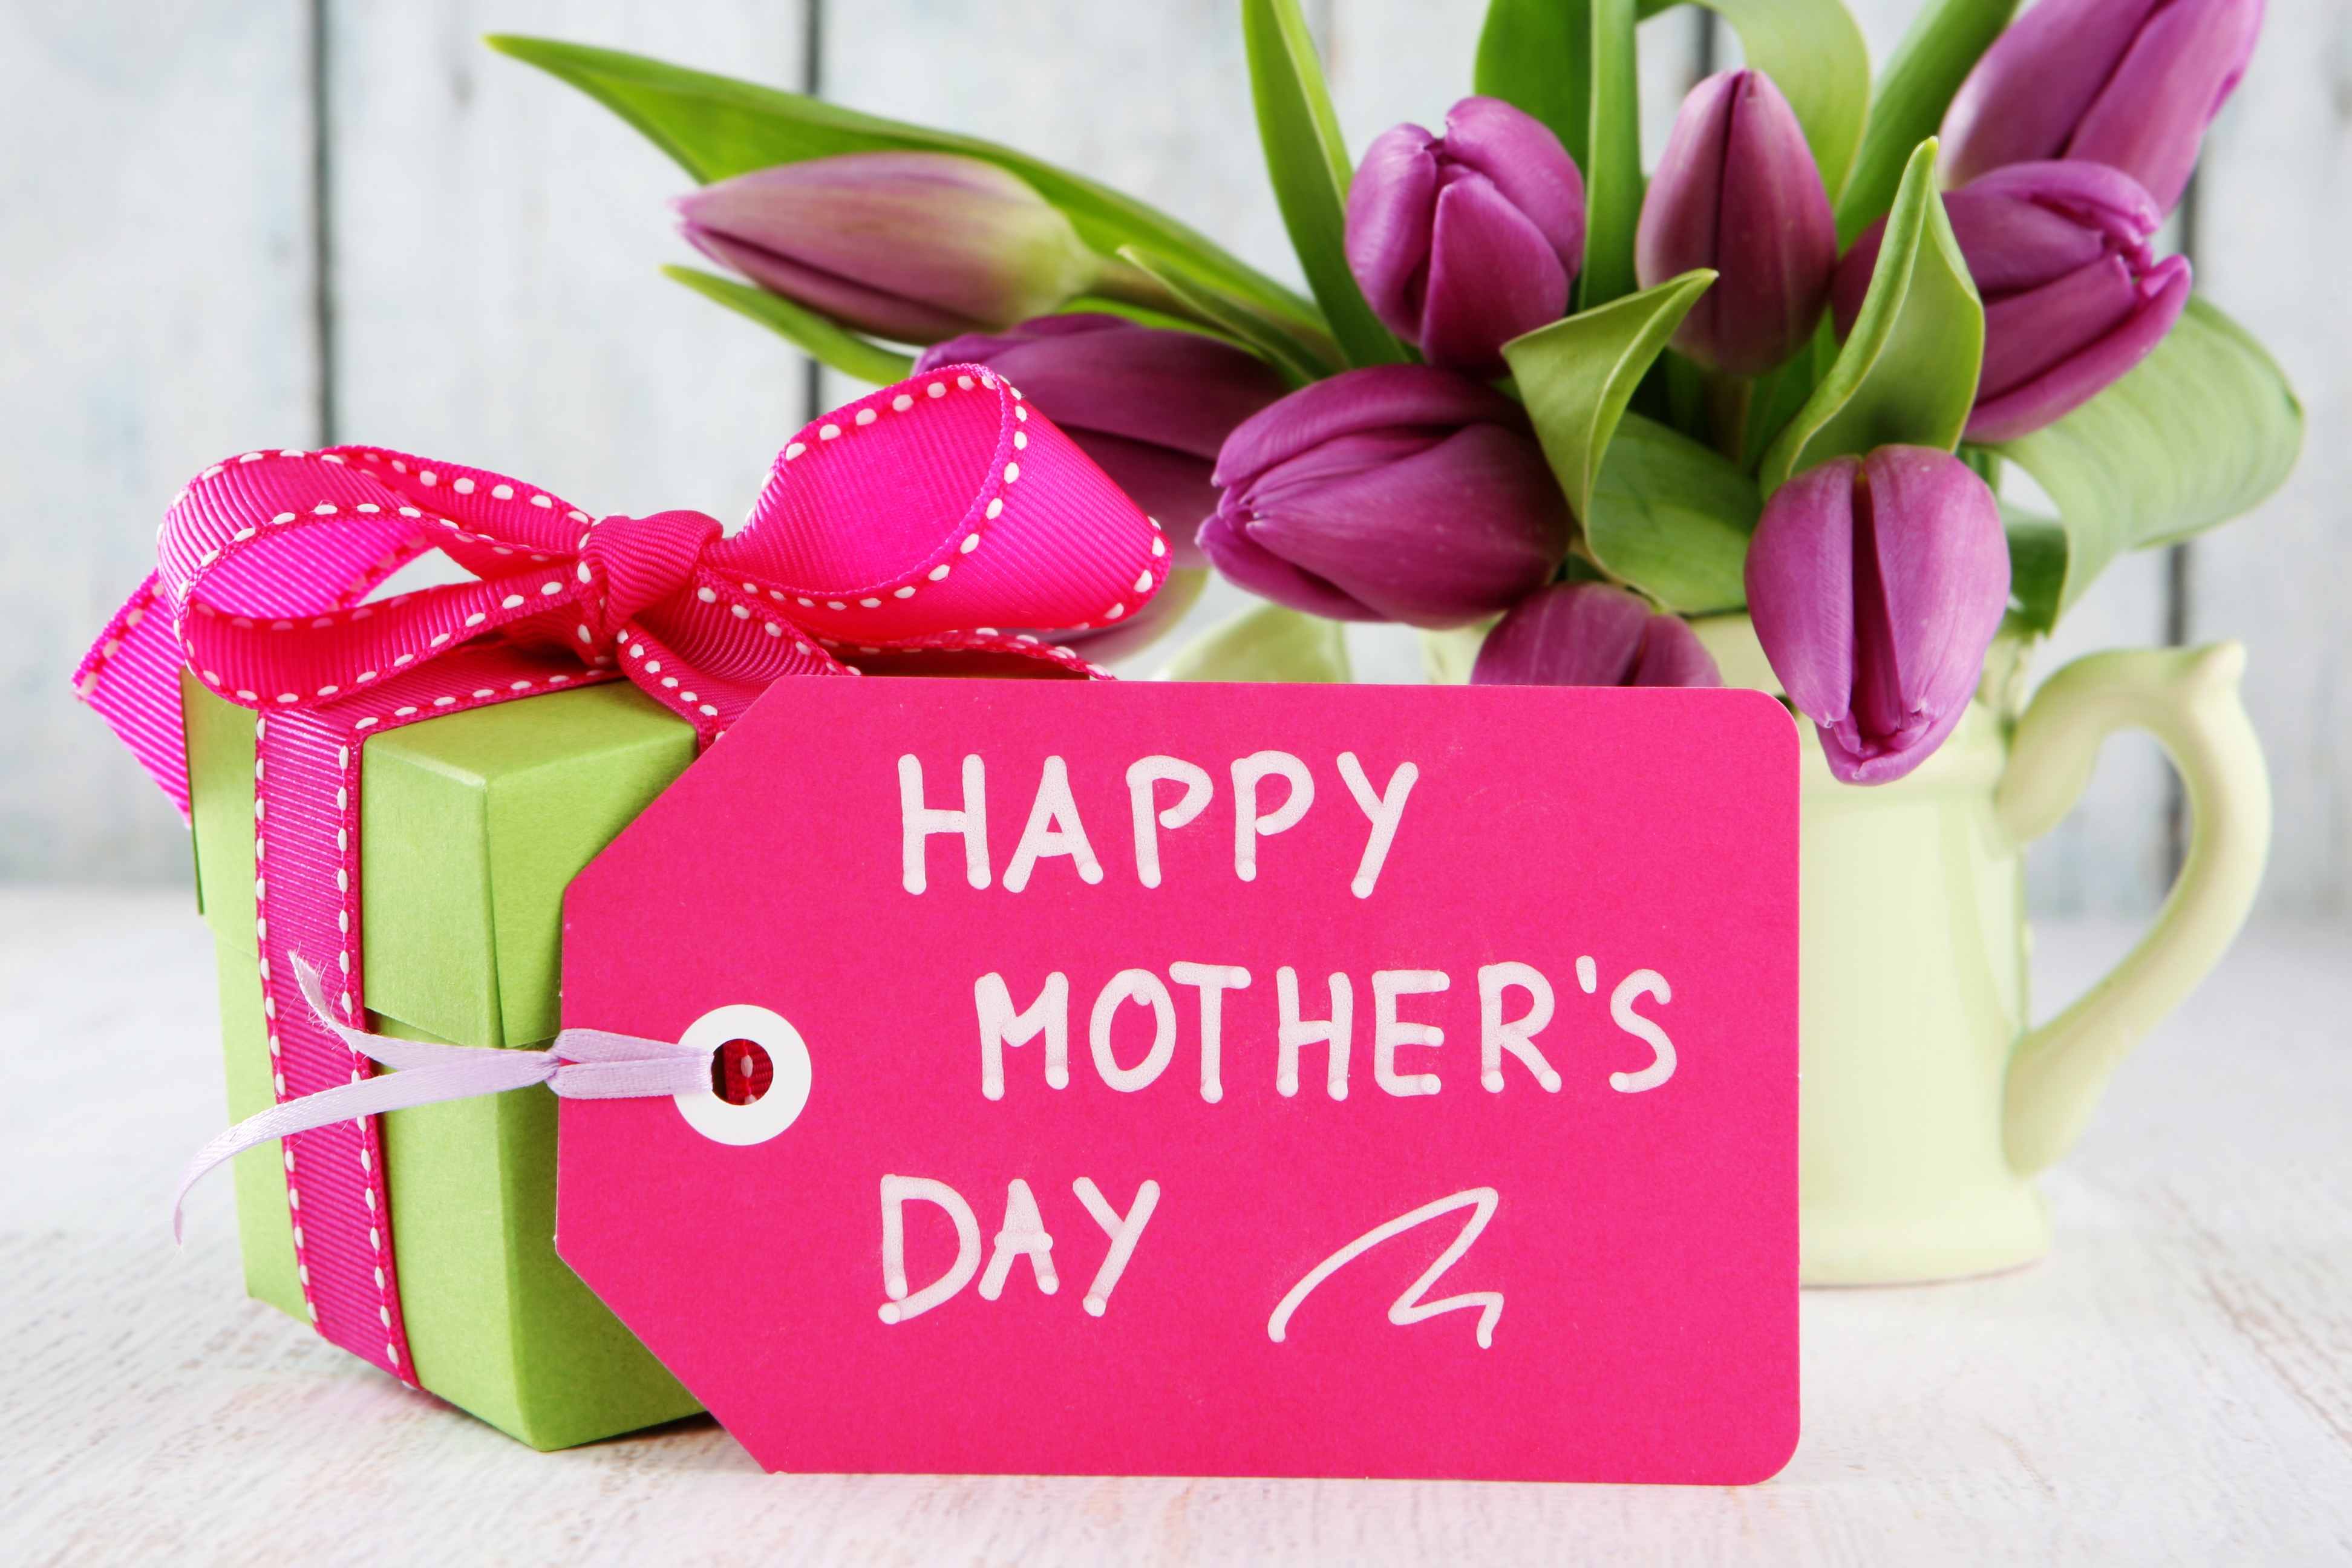 Mothers Day Wishes, Quotes, Messages For WhatsApp Status